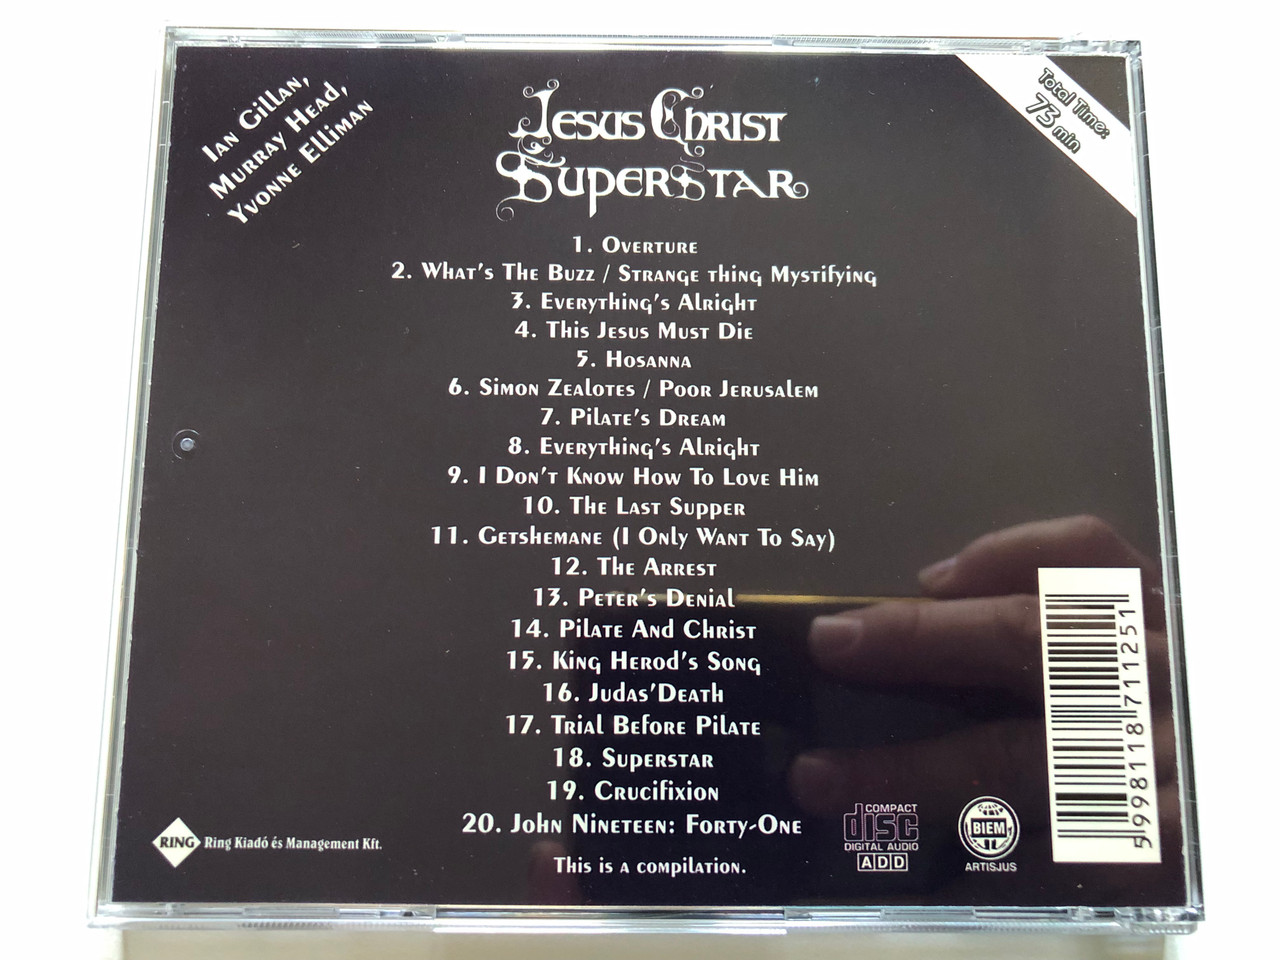 https://cdn10.bigcommerce.com/s-62bdpkt7pb/products/0/images/307884/Jesus_Christ_Superstar_-_A_Rock_Opera_by_Andrew_Lloyd_Webber_and_Tim_Rice_Ring_Audio_CD_RCD_1125_4__60826.1698906580.1280.1280.JPG?c=2